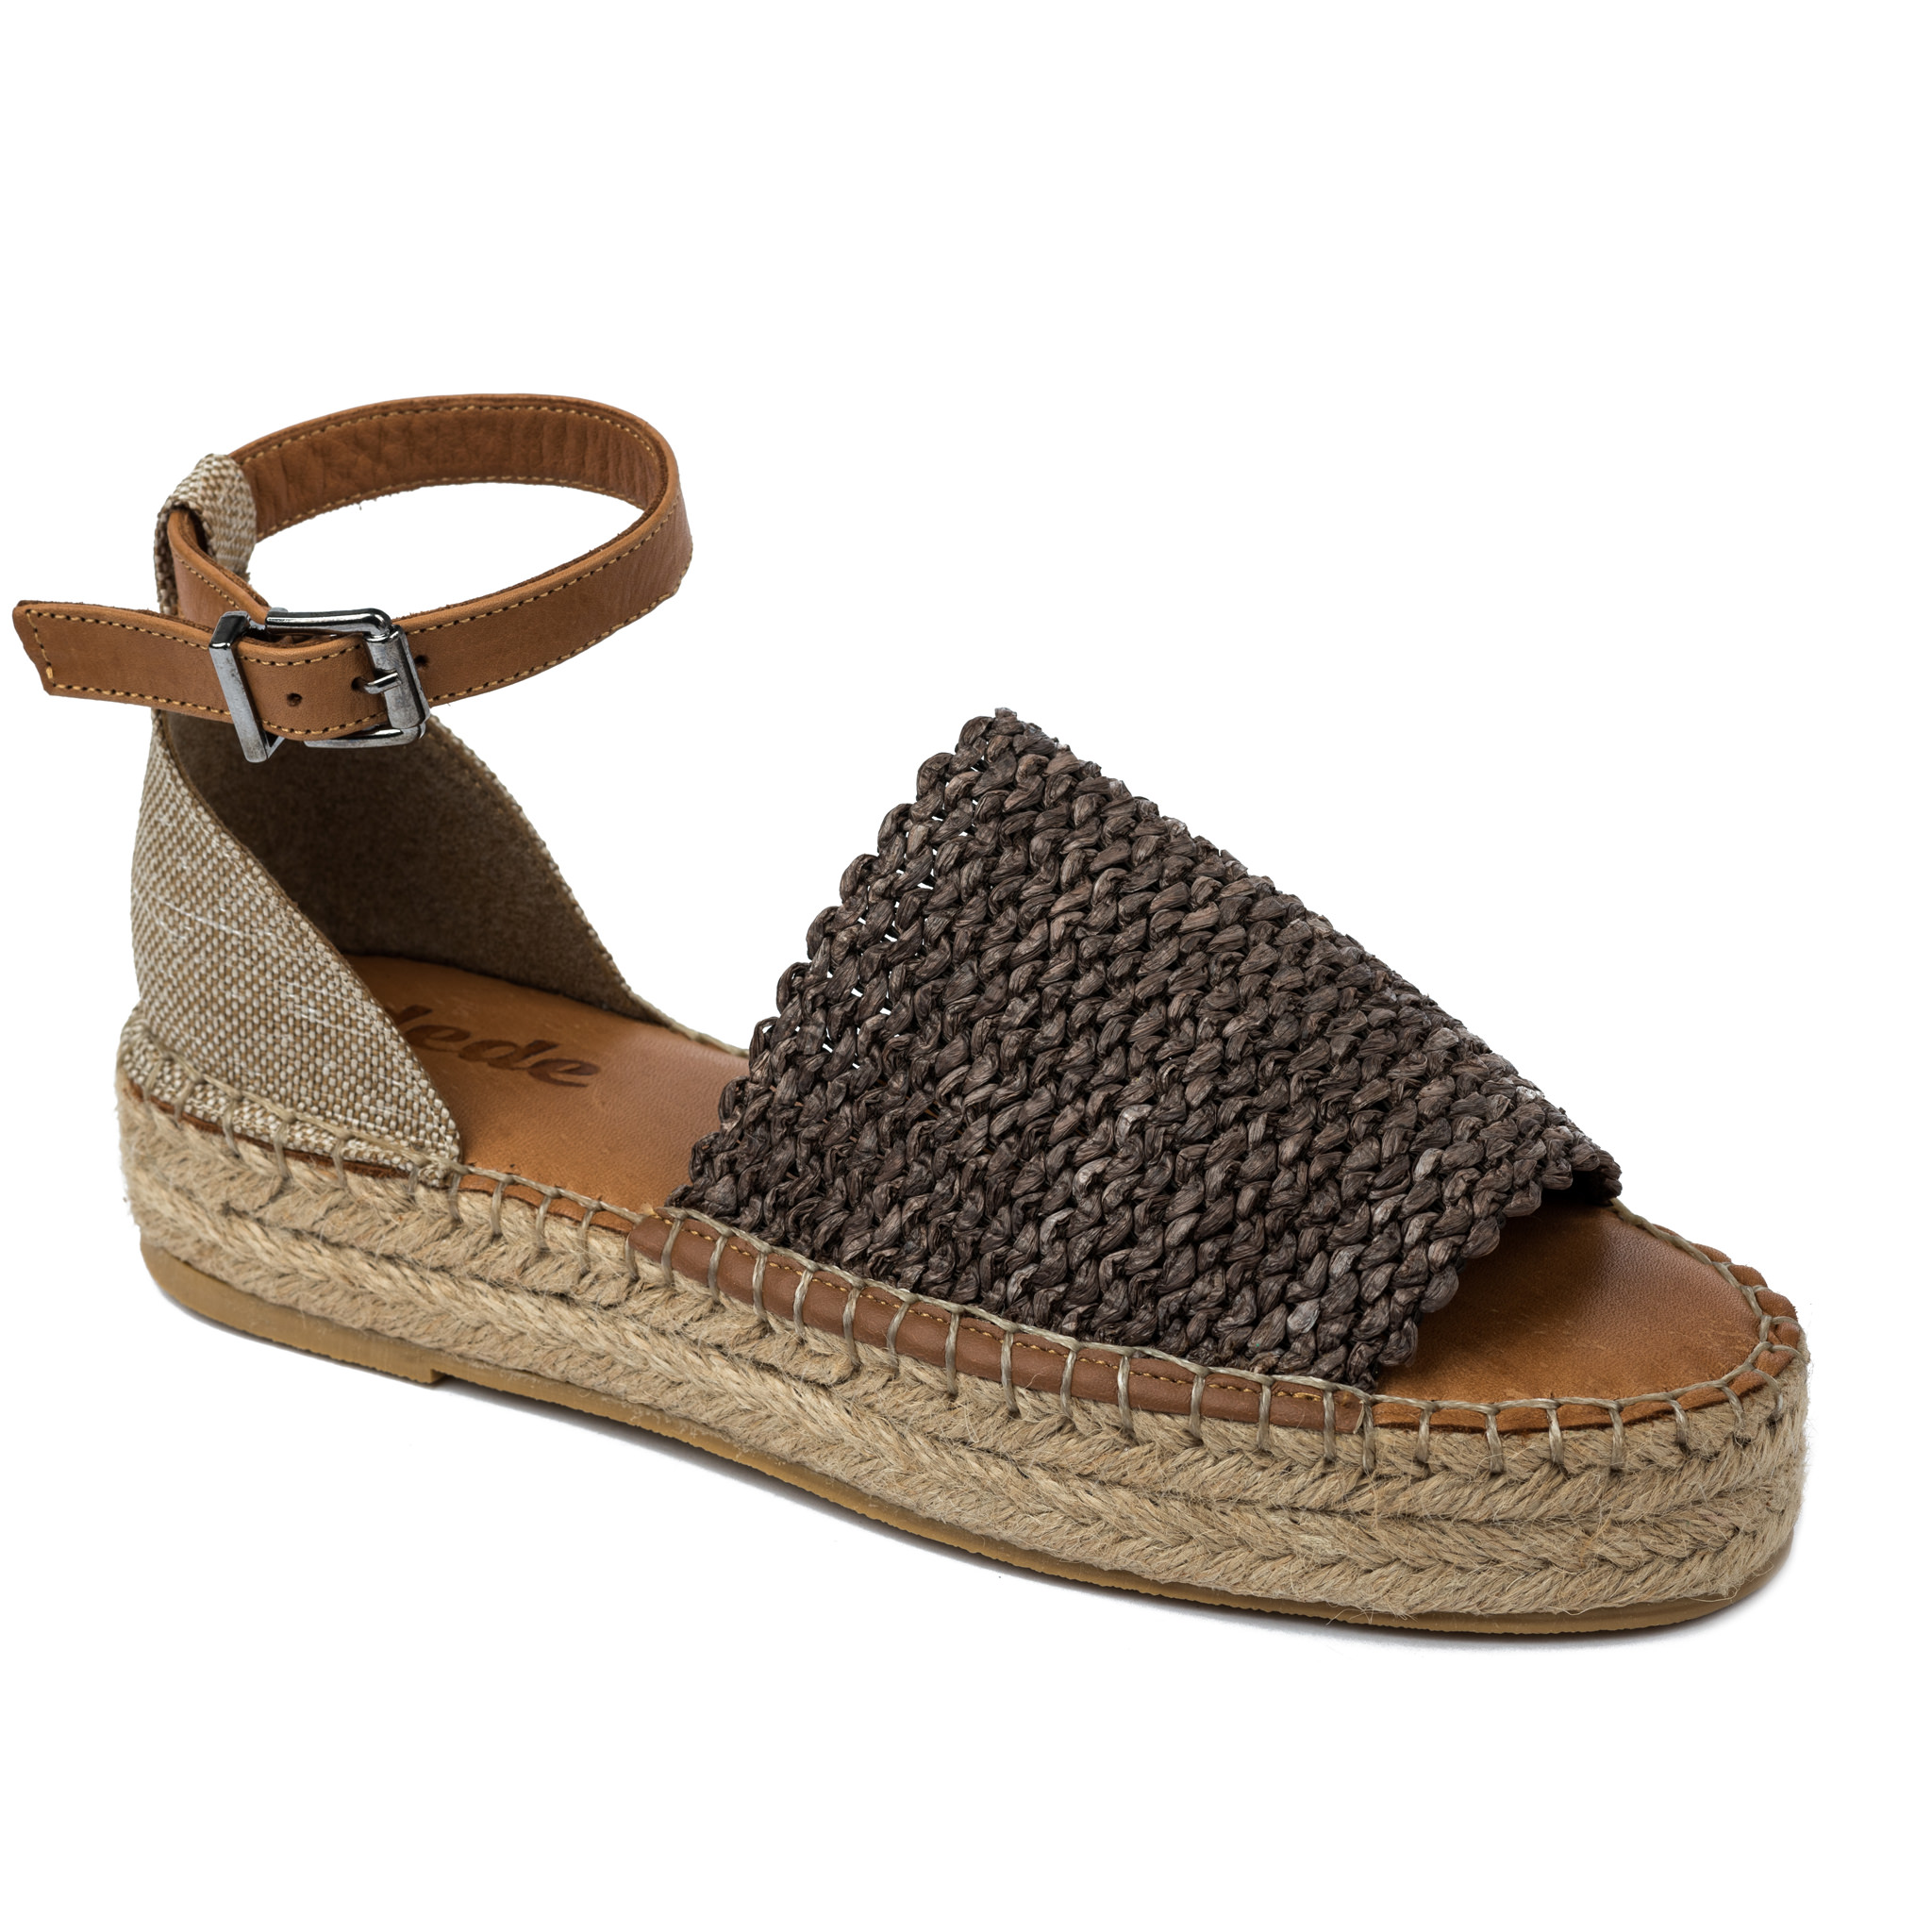 Leather espadrilles A663 - BROWN